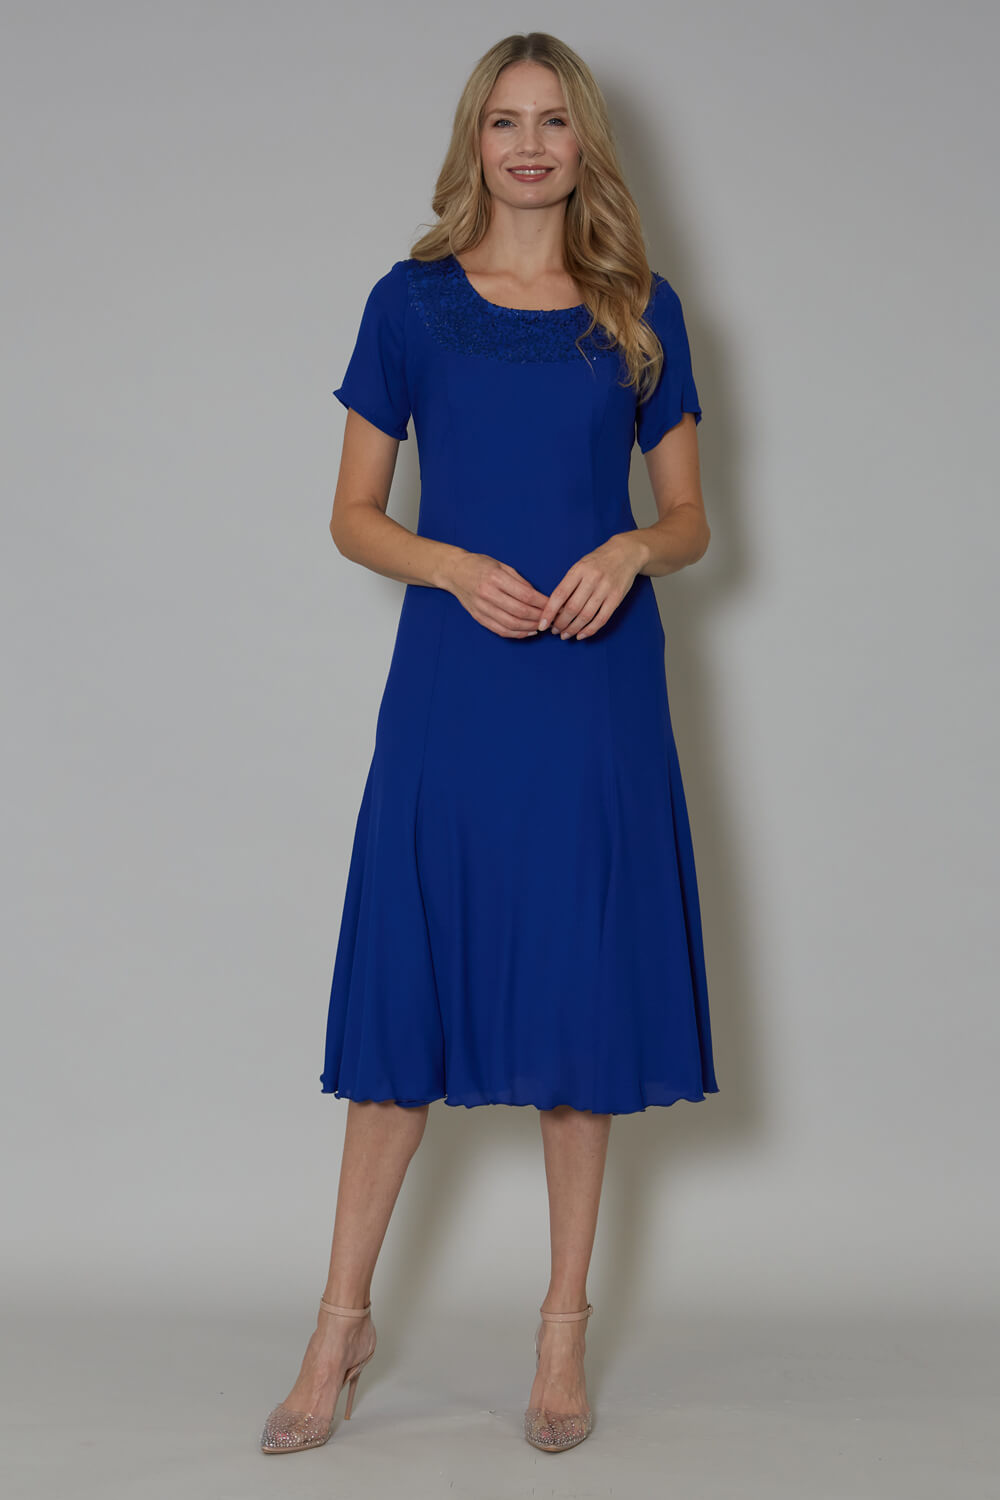 Royal Blue Julianna Georgette Fit and Flare Dress, Image 3 of 4